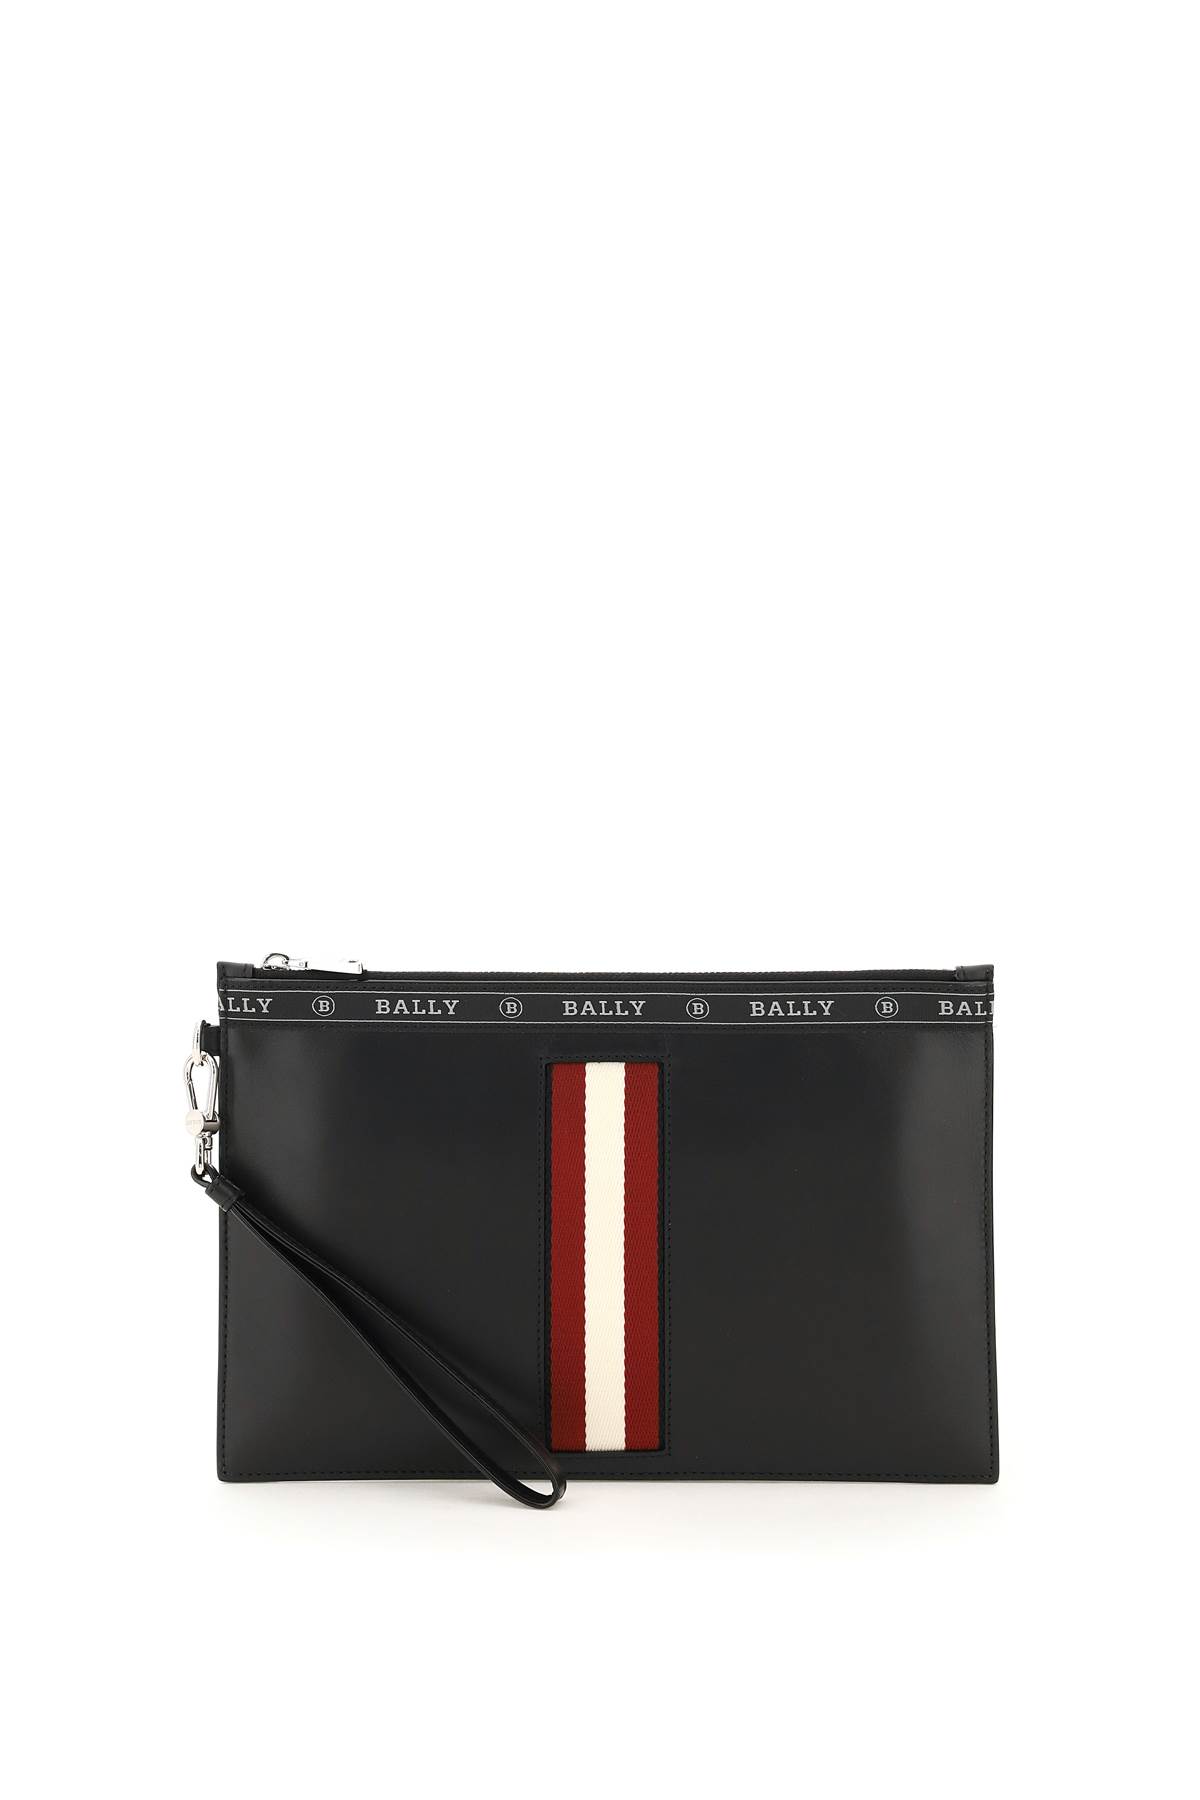 Bally leather benery pouch - Walmart.com